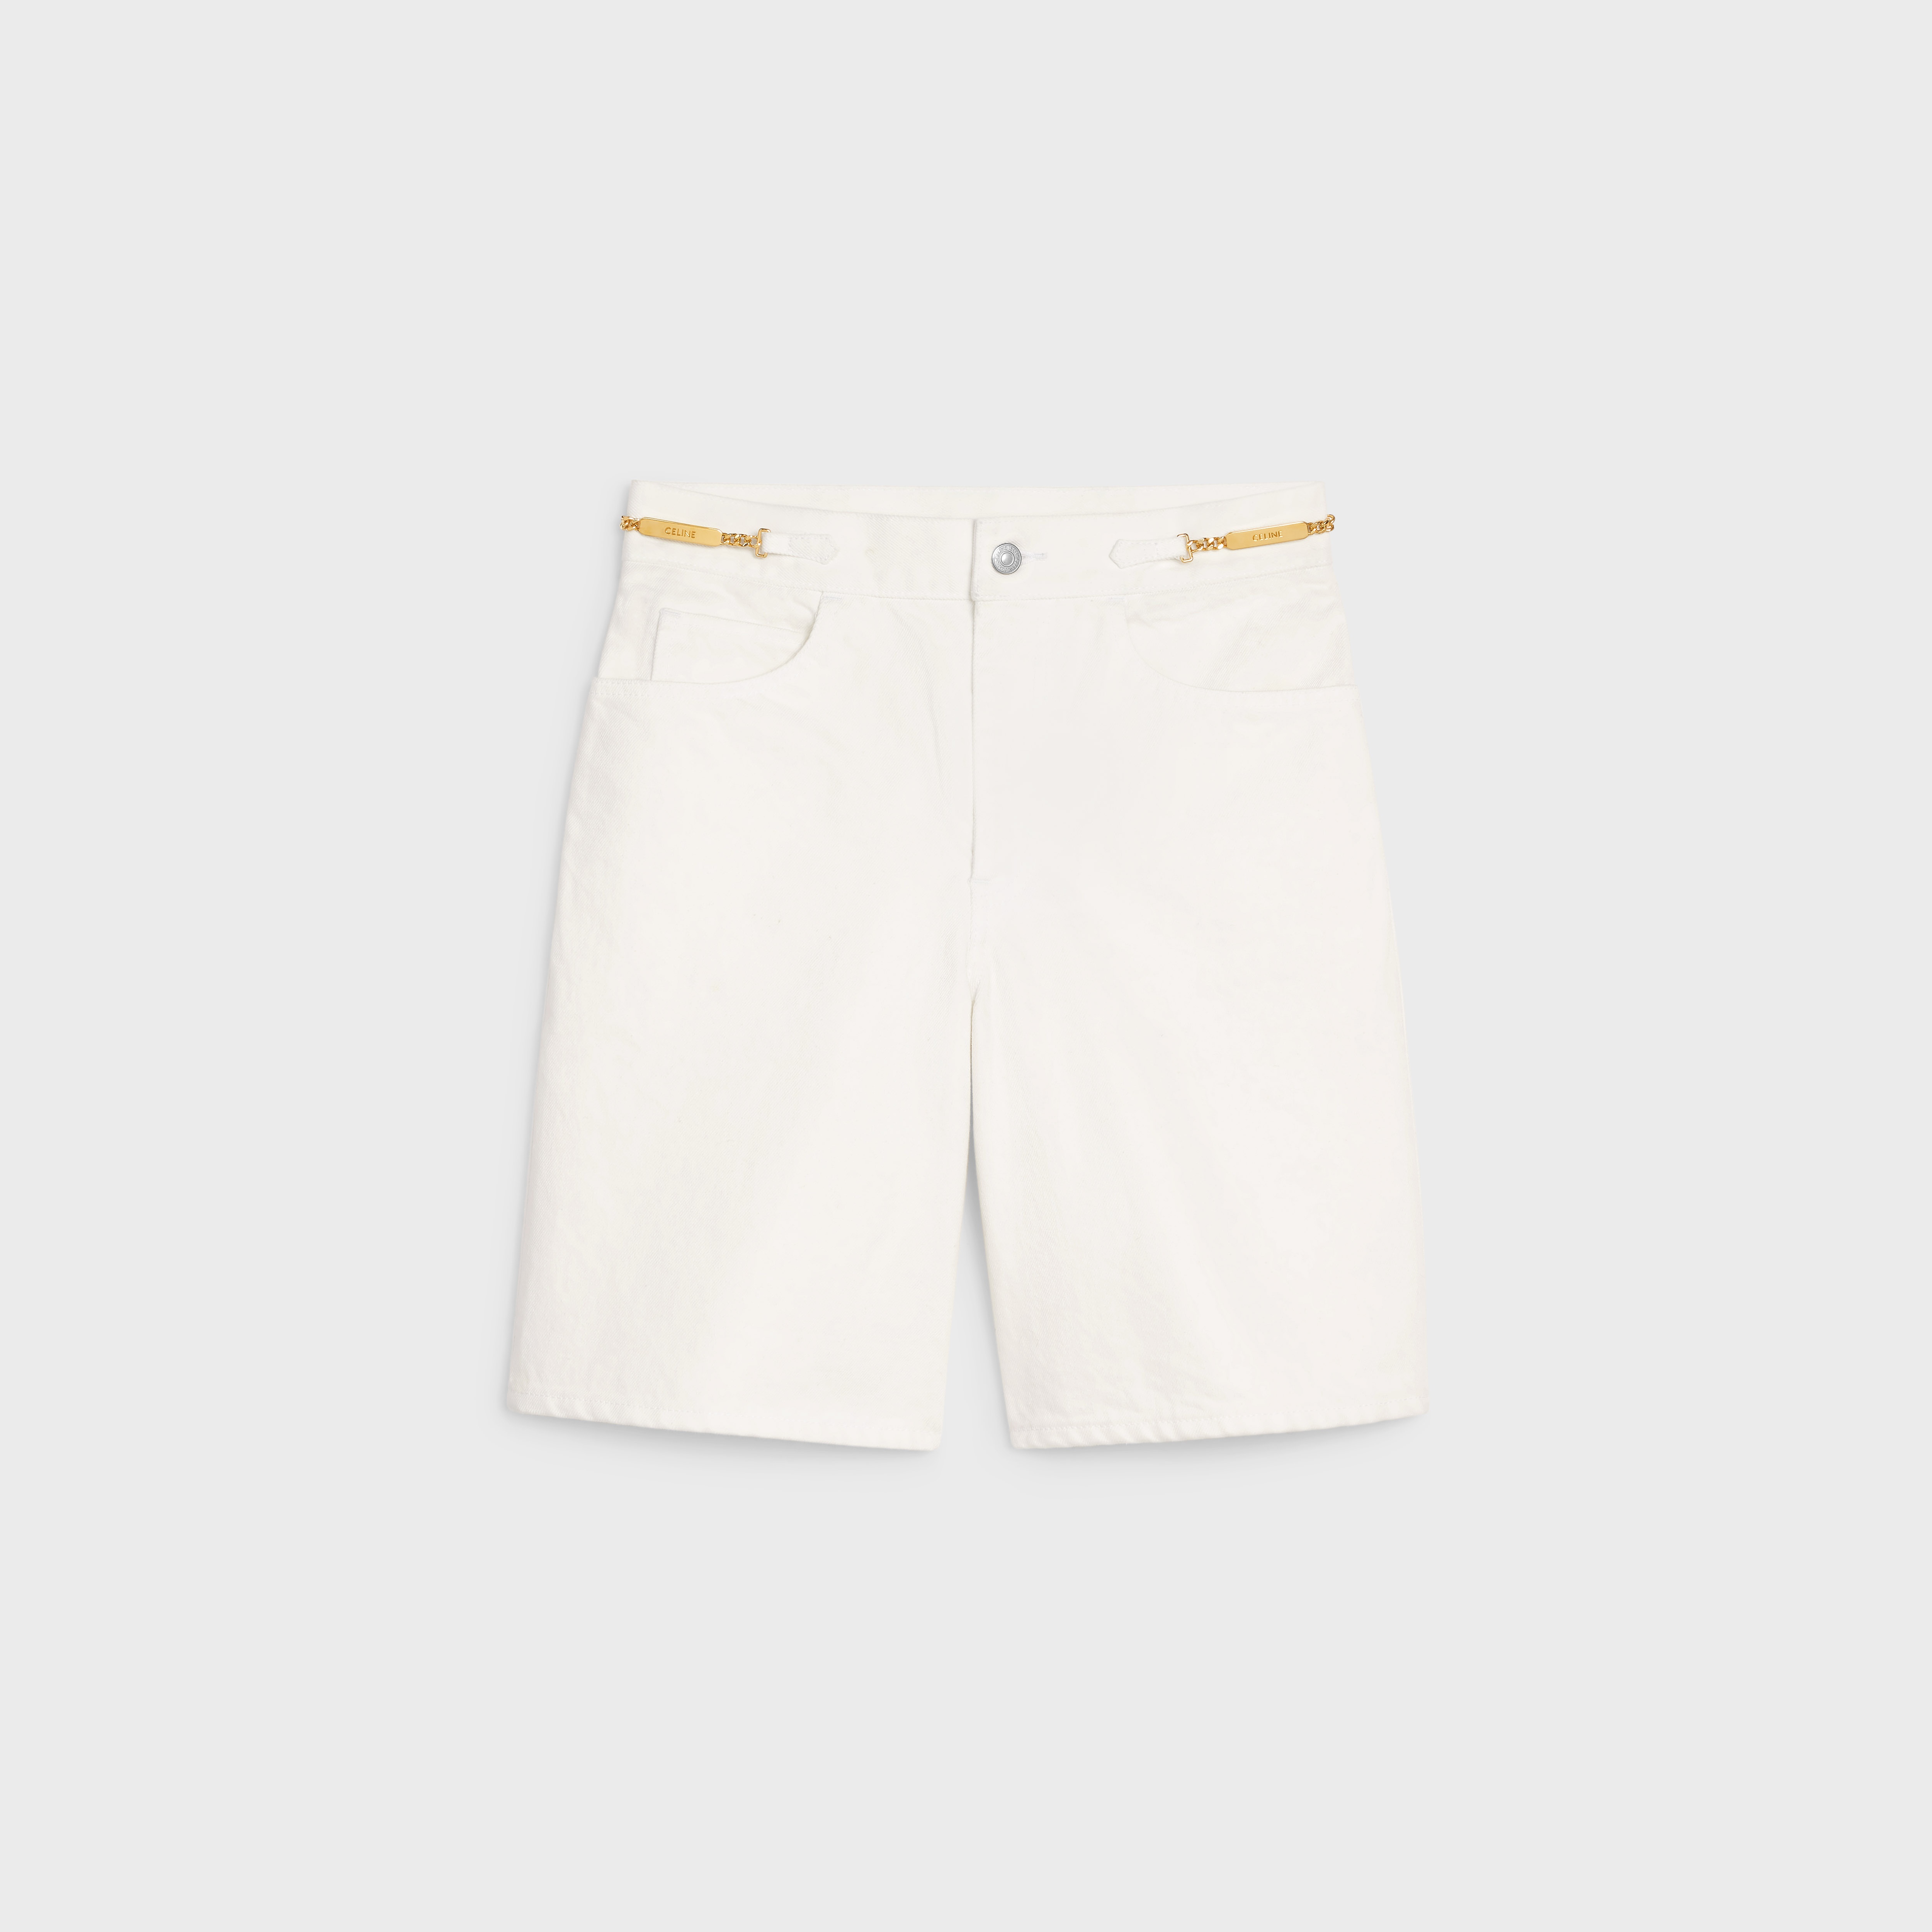 SHORTS WITH GOURMETTE CHAINS IN OPTIC WHITE WASH DENIM - 1